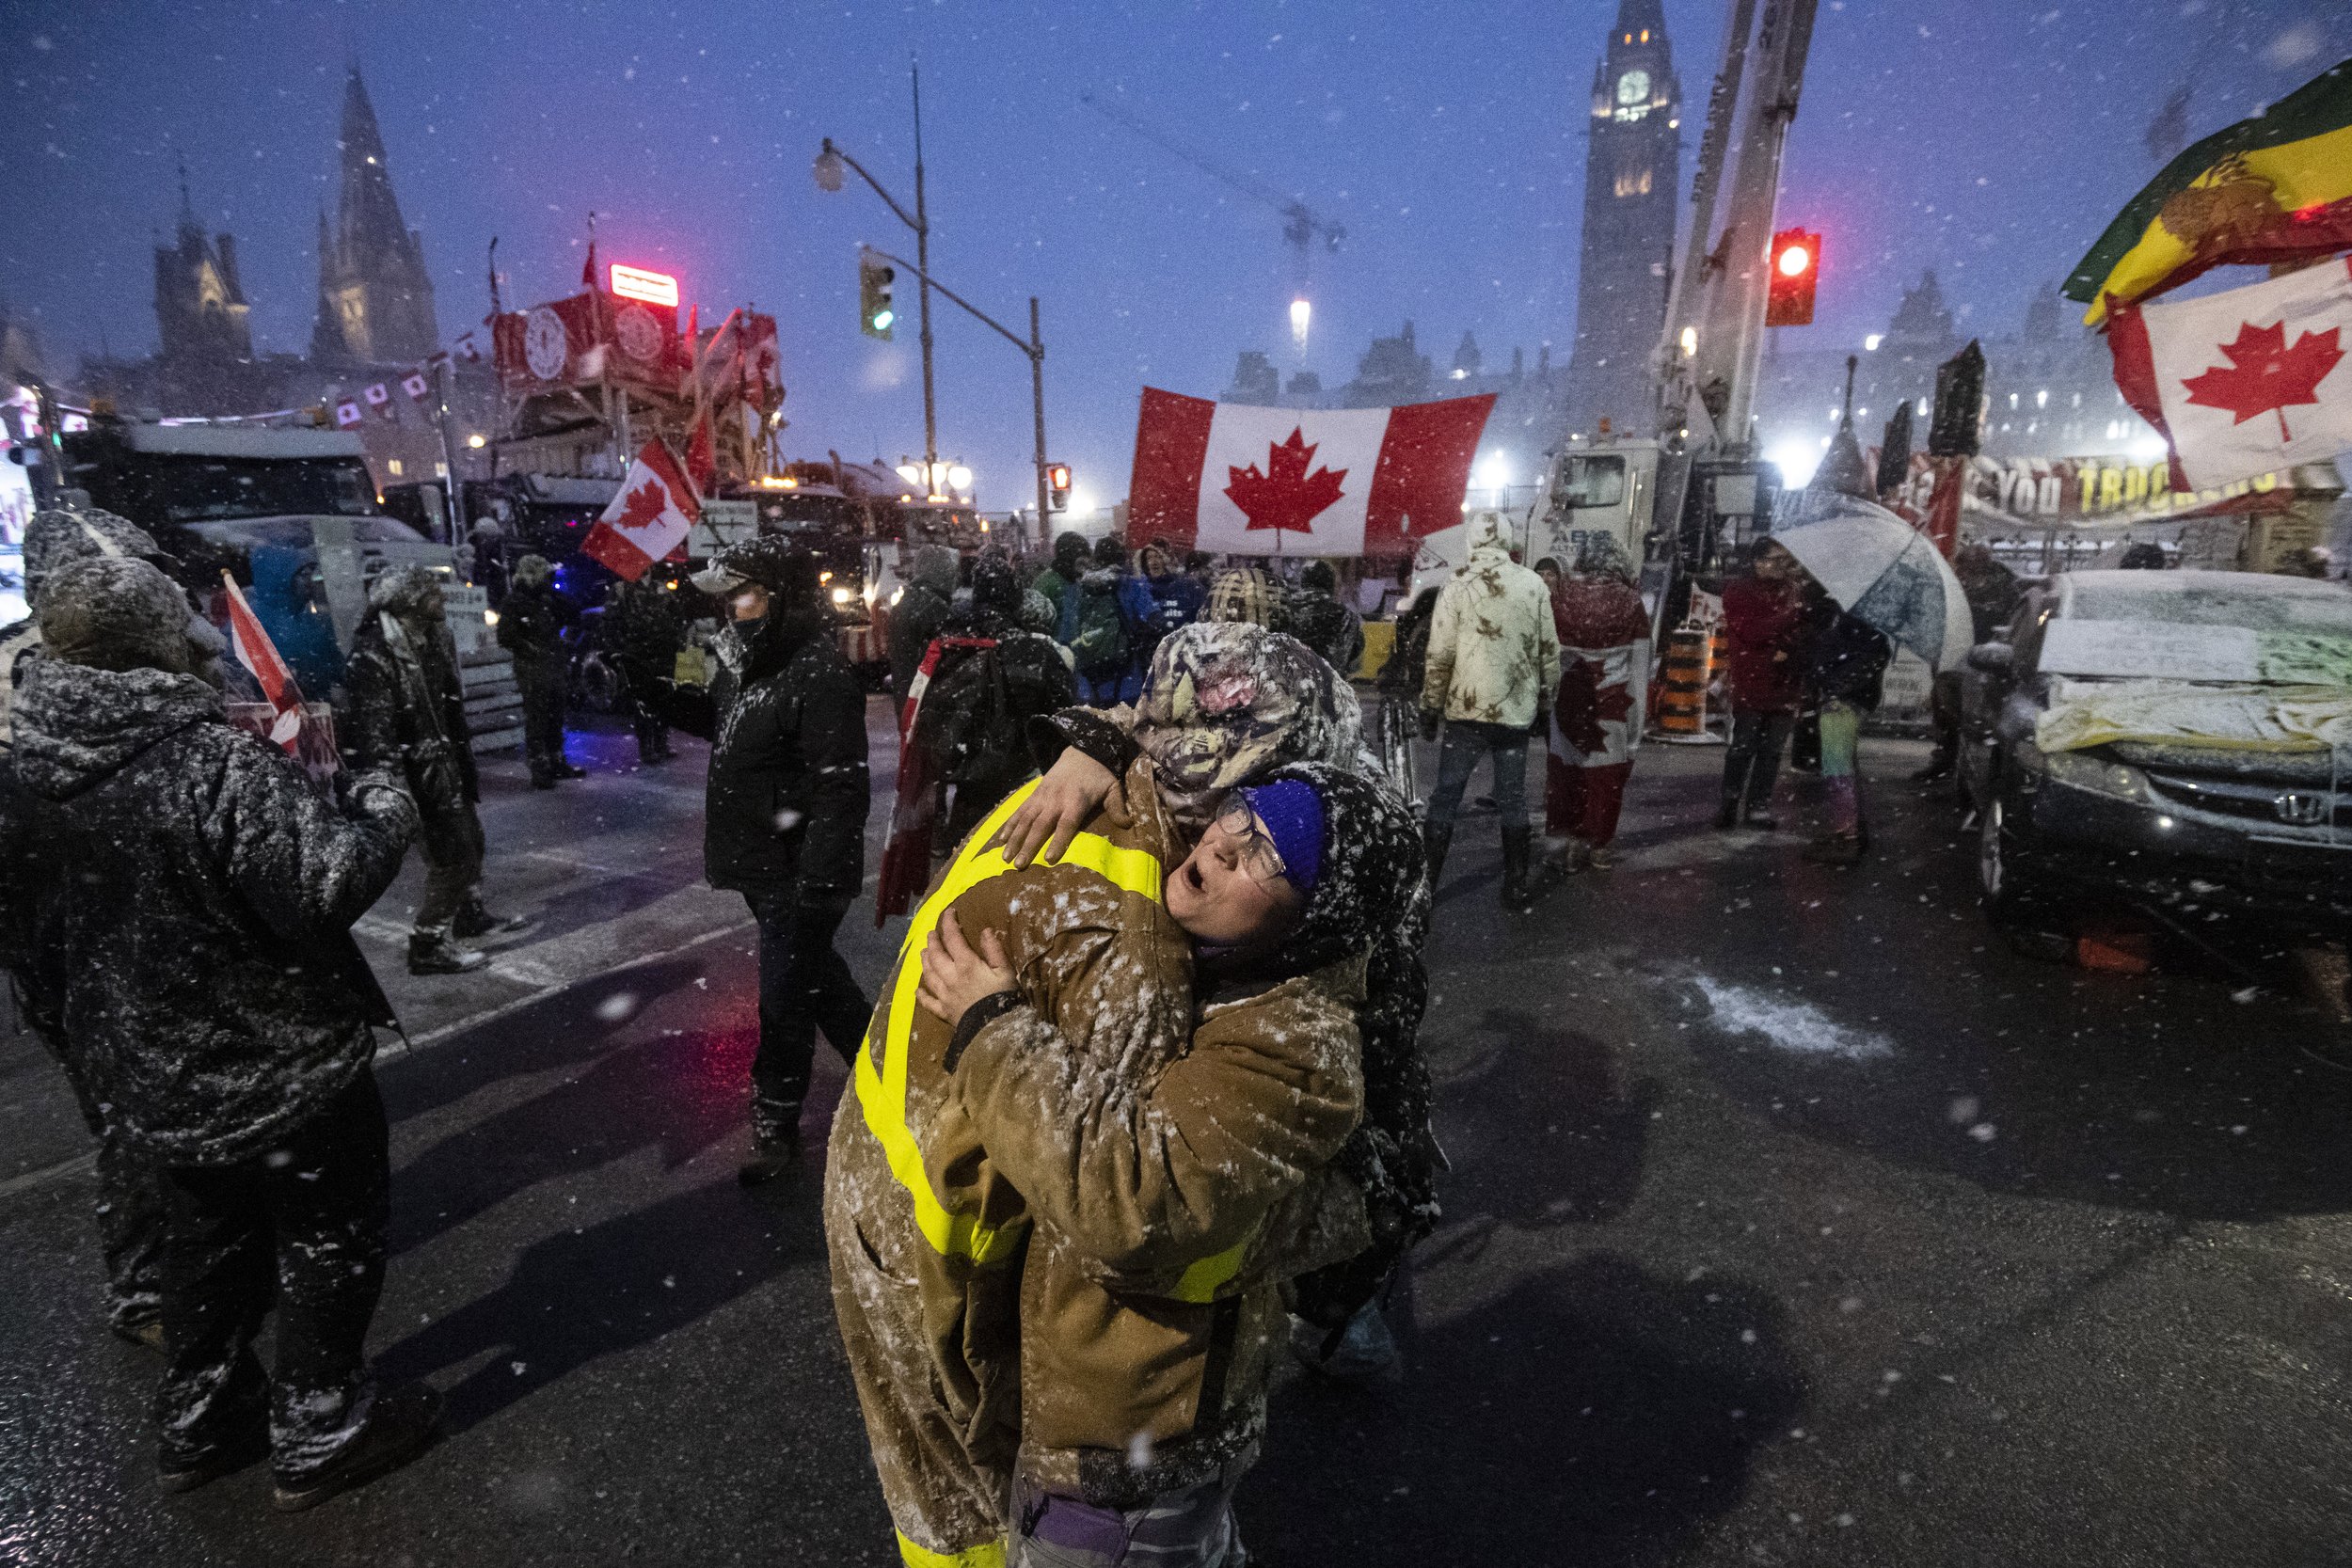  Protesters dance and embrace as a song plays over the speakers, during an ongoing protest against COVID-19 measures that has grown into a broader anti-government protest, in Ottawa, Ontario, on Thursday, Feb. 17, 2022. (Justin Tang/The Canadian Pres